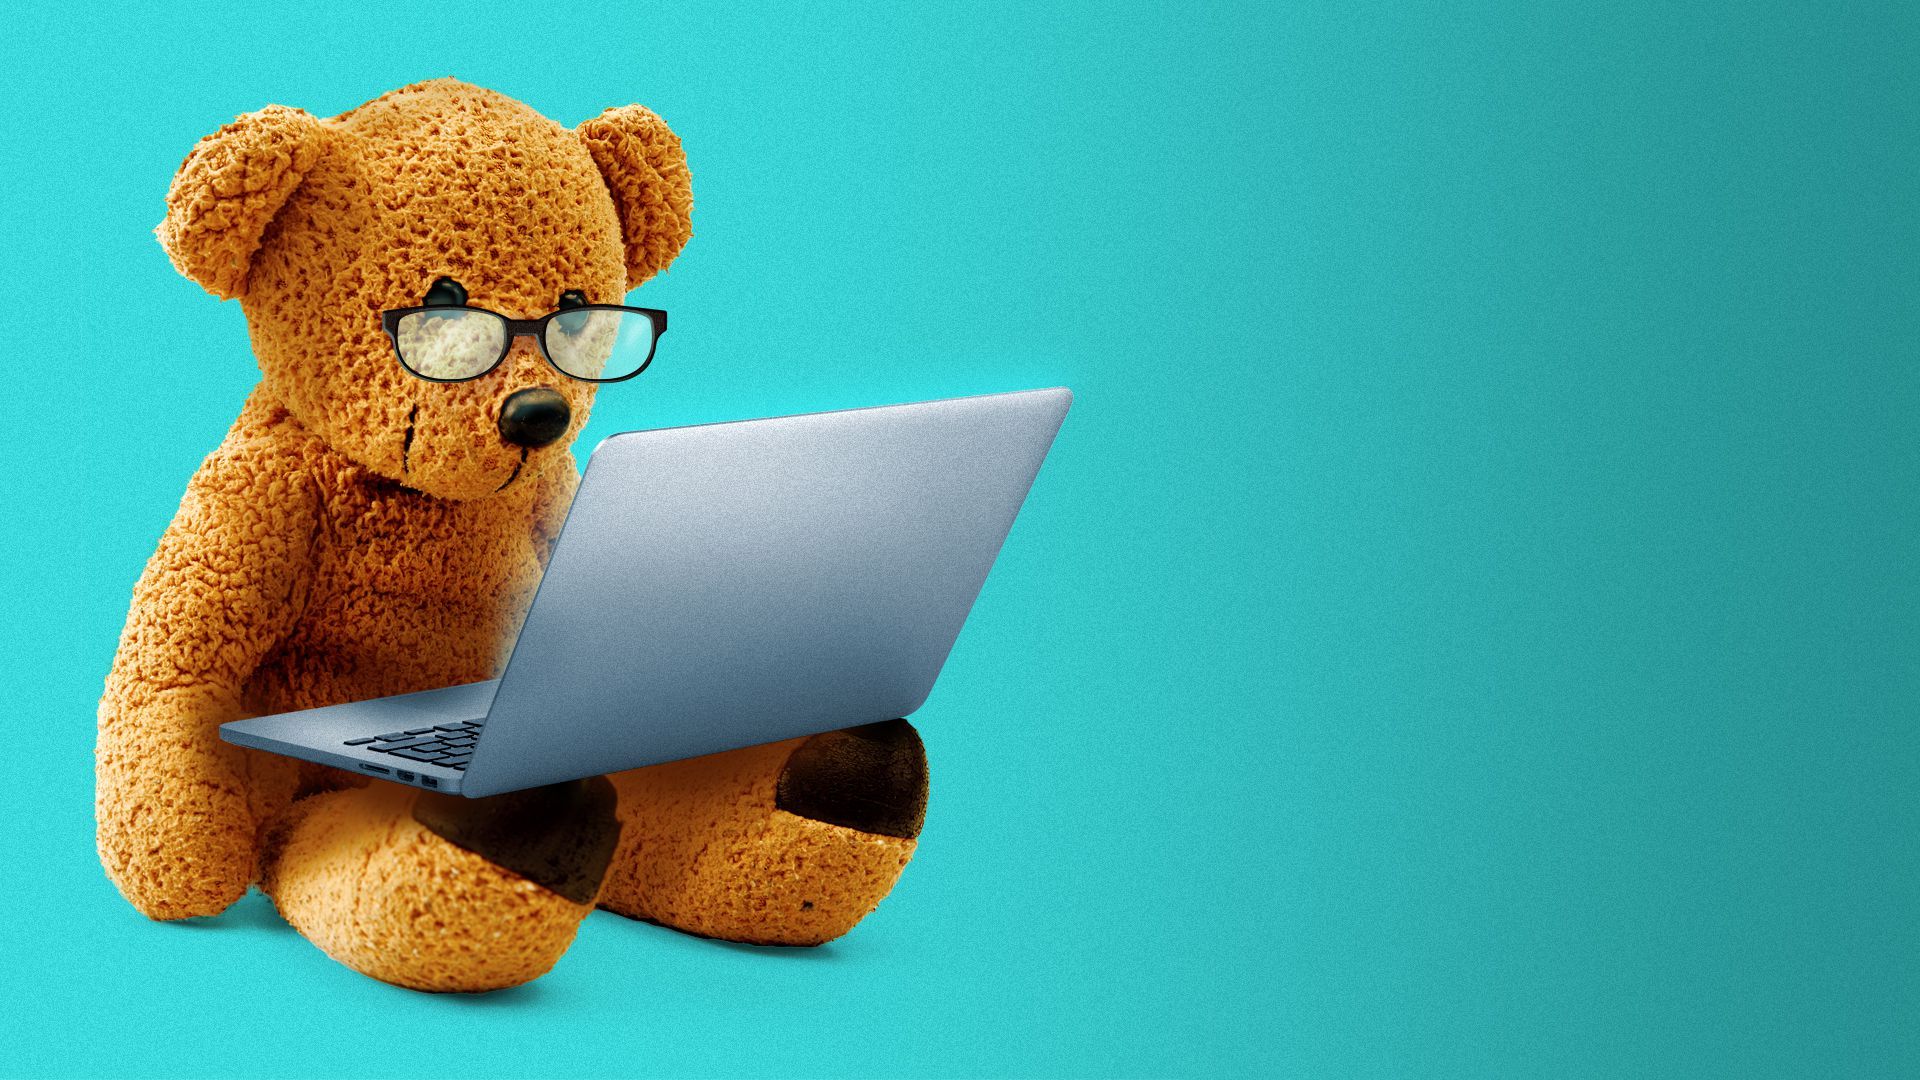 Illustration of a teddy bear wearing glasses looking at a laptop.